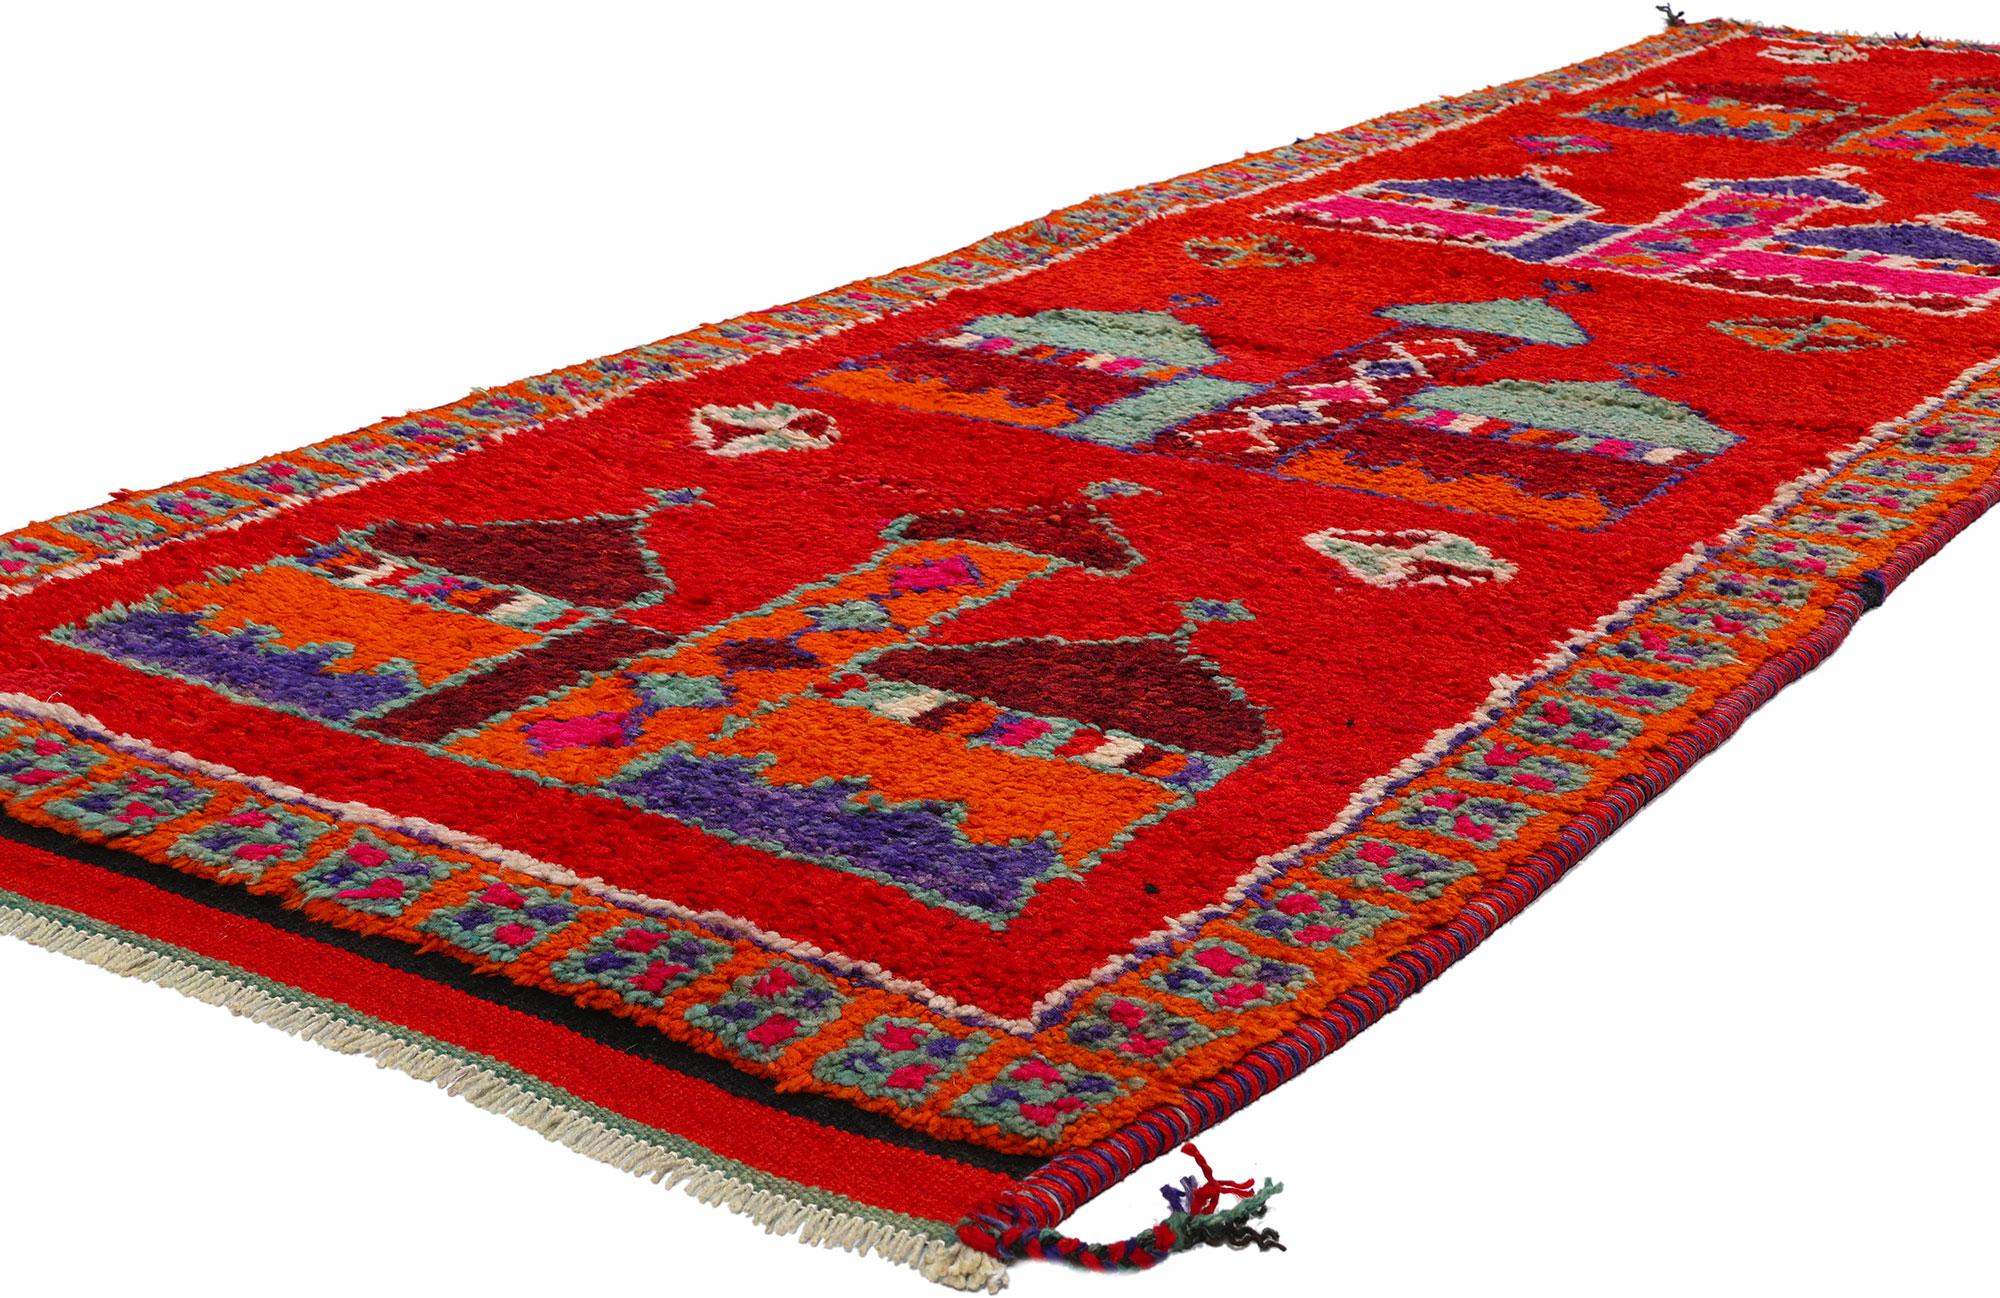 53908 Vintage Red Kurdish Mosque Pictorial Rug, 03'05 x 10'09. Crafted with meticulous precision and unwavering dedication by Kurdish Herki tribes in eastern Turkey, particularly in the Hakkari province, Kurdish rugs are renowned for their unmatched